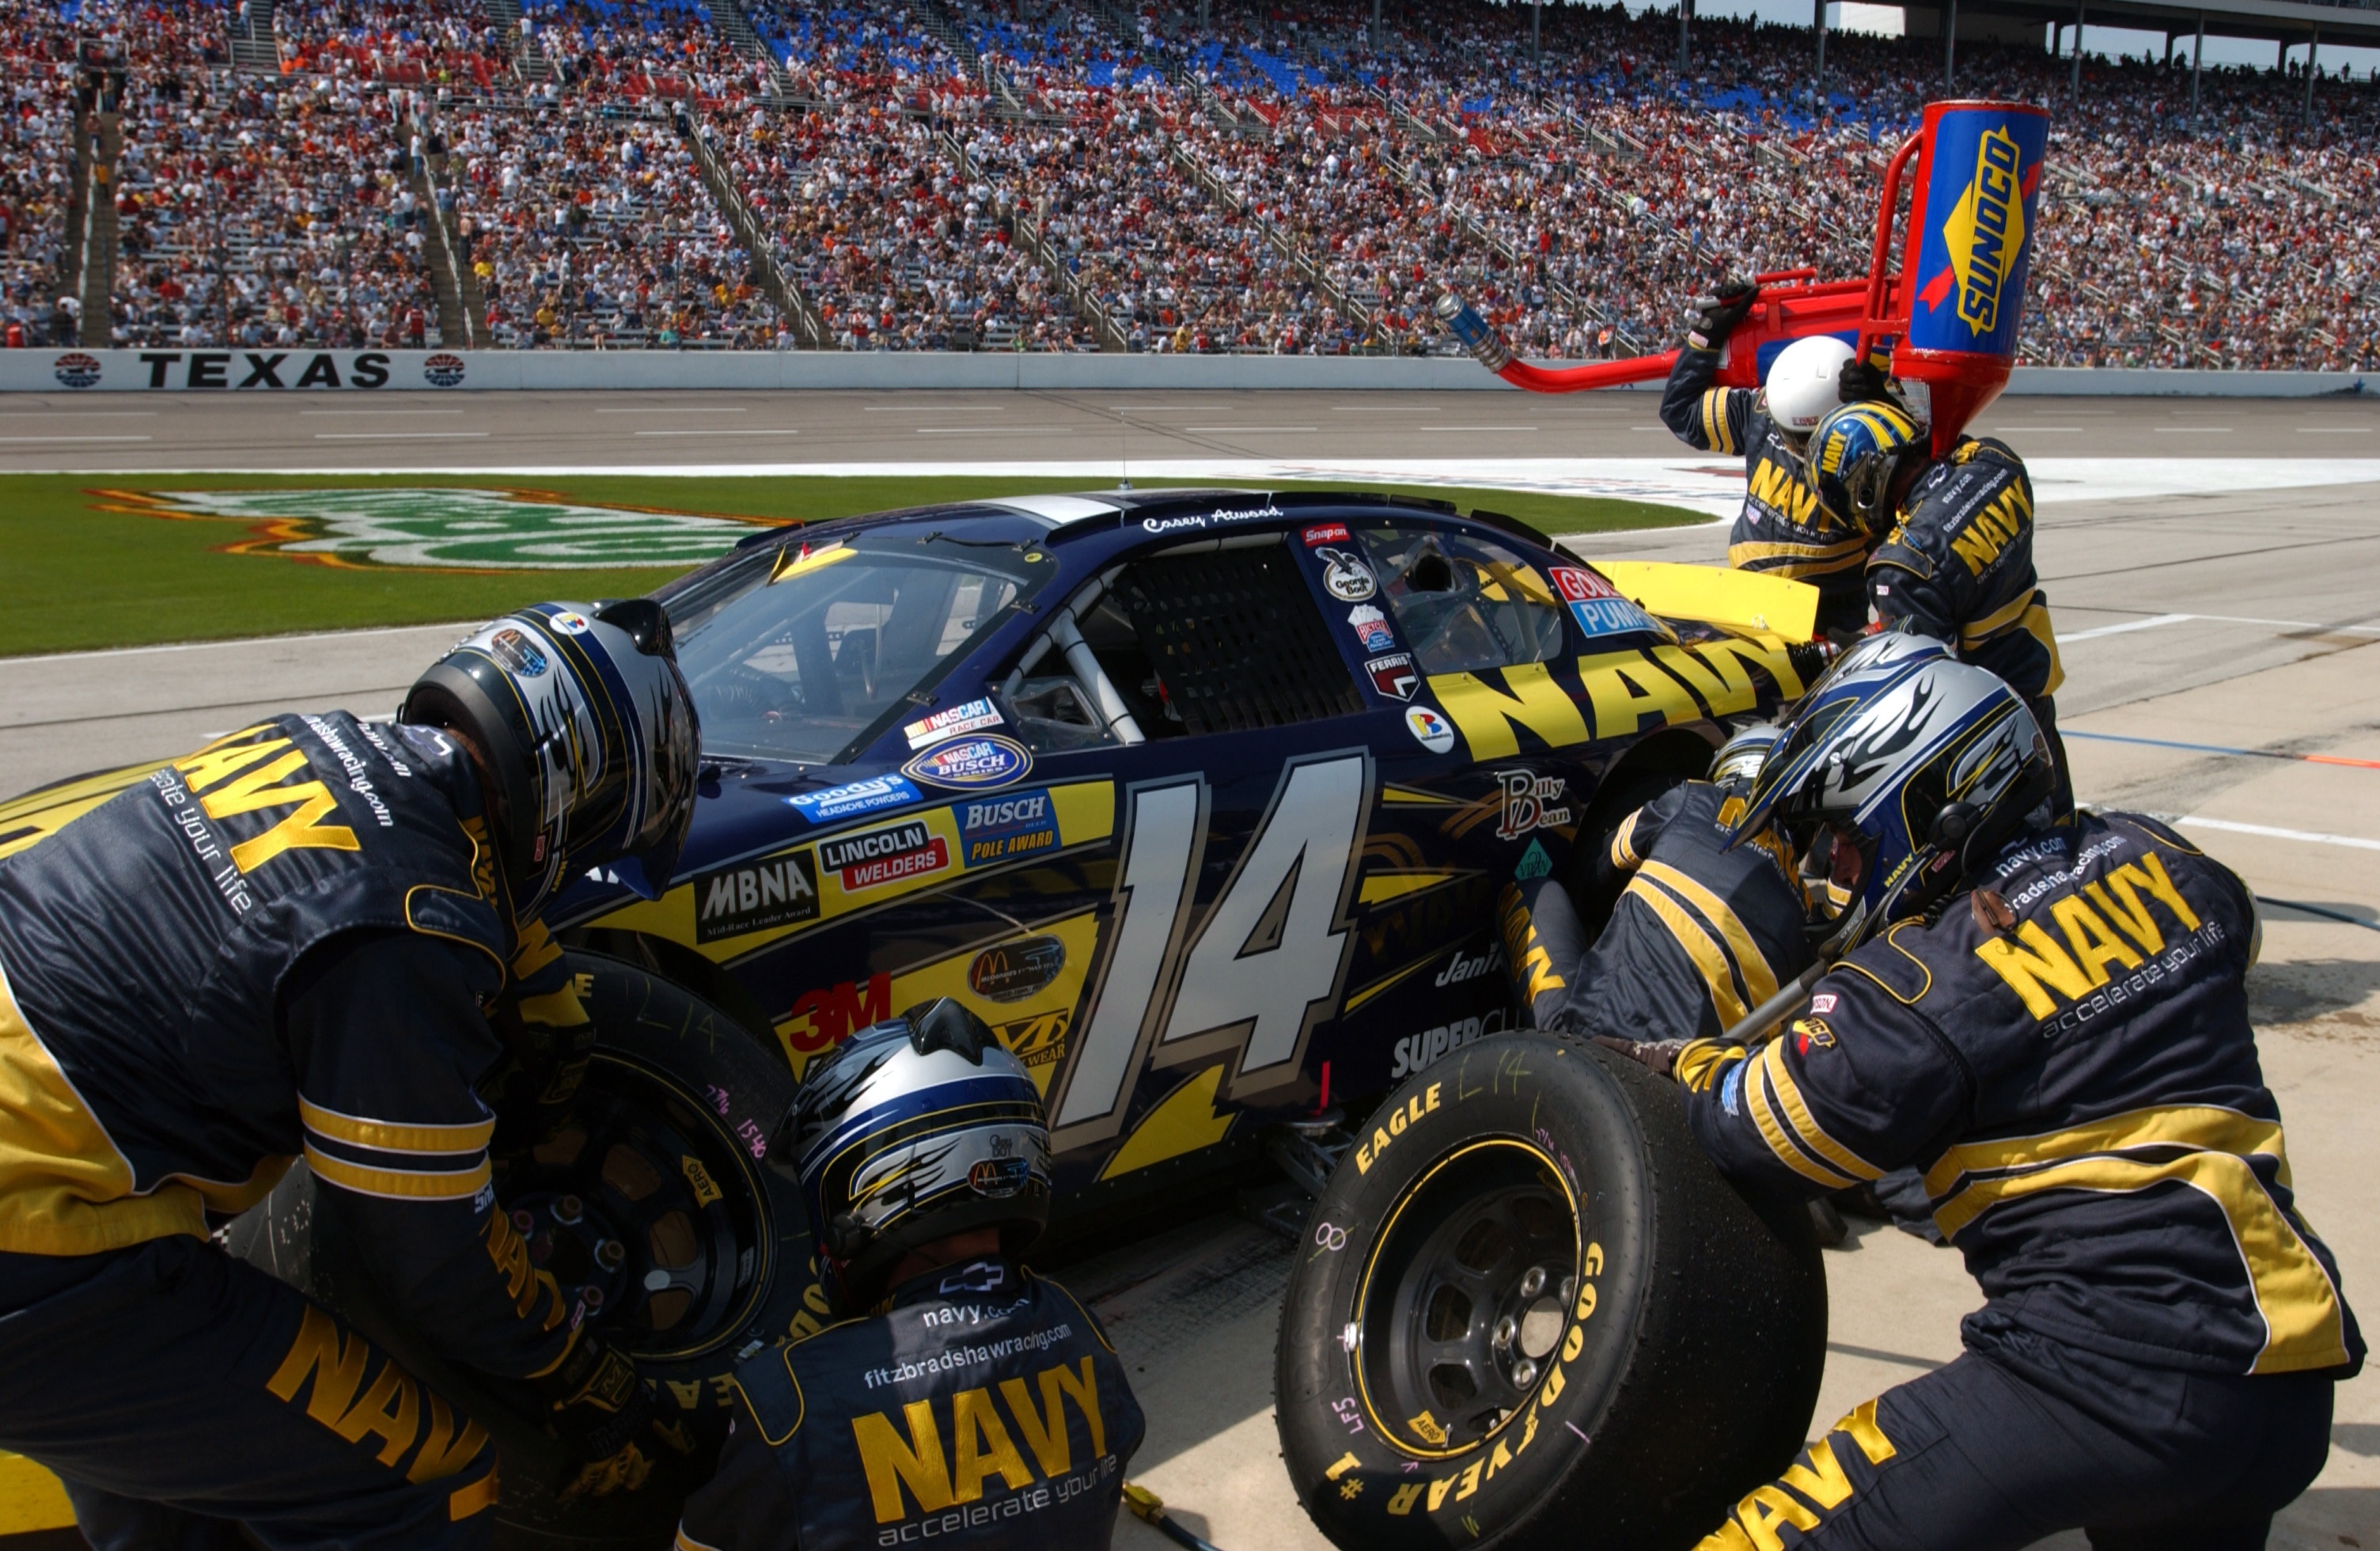 Auto Racing: Navy, Fitz-Brainhaw pit crew, A fault-free pit stop, Texas Motor Speedway, NASCAR. 3010x1960 HD Wallpaper.